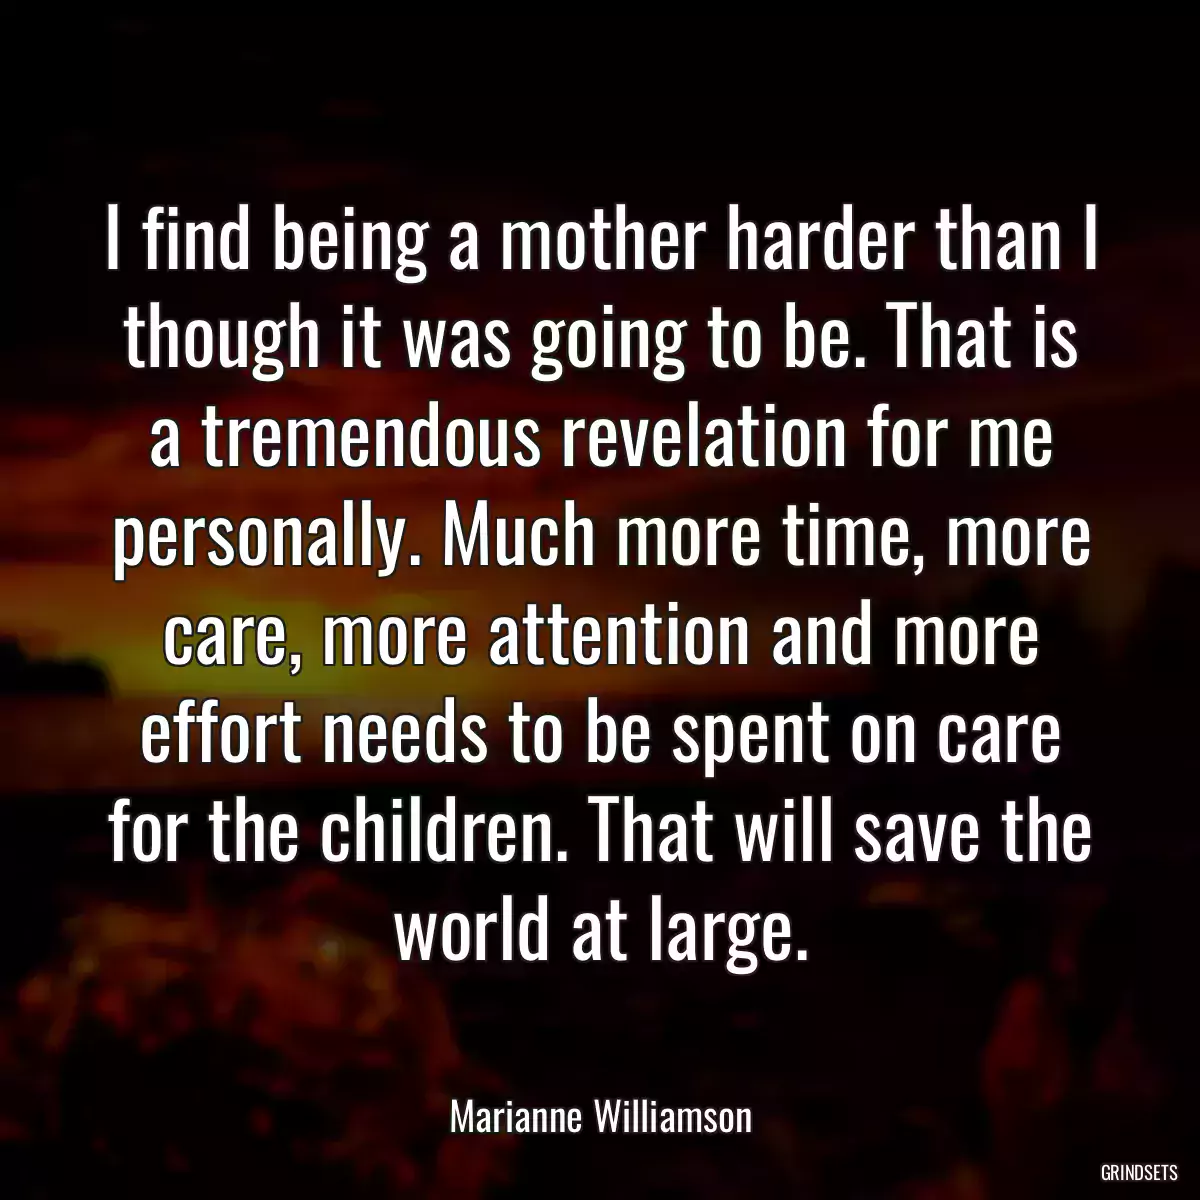 I find being a mother harder than I though it was going to be. That is a tremendous revelation for me personally. Much more time, more care, more attention and more effort needs to be spent on care for the children. That will save the world at large.